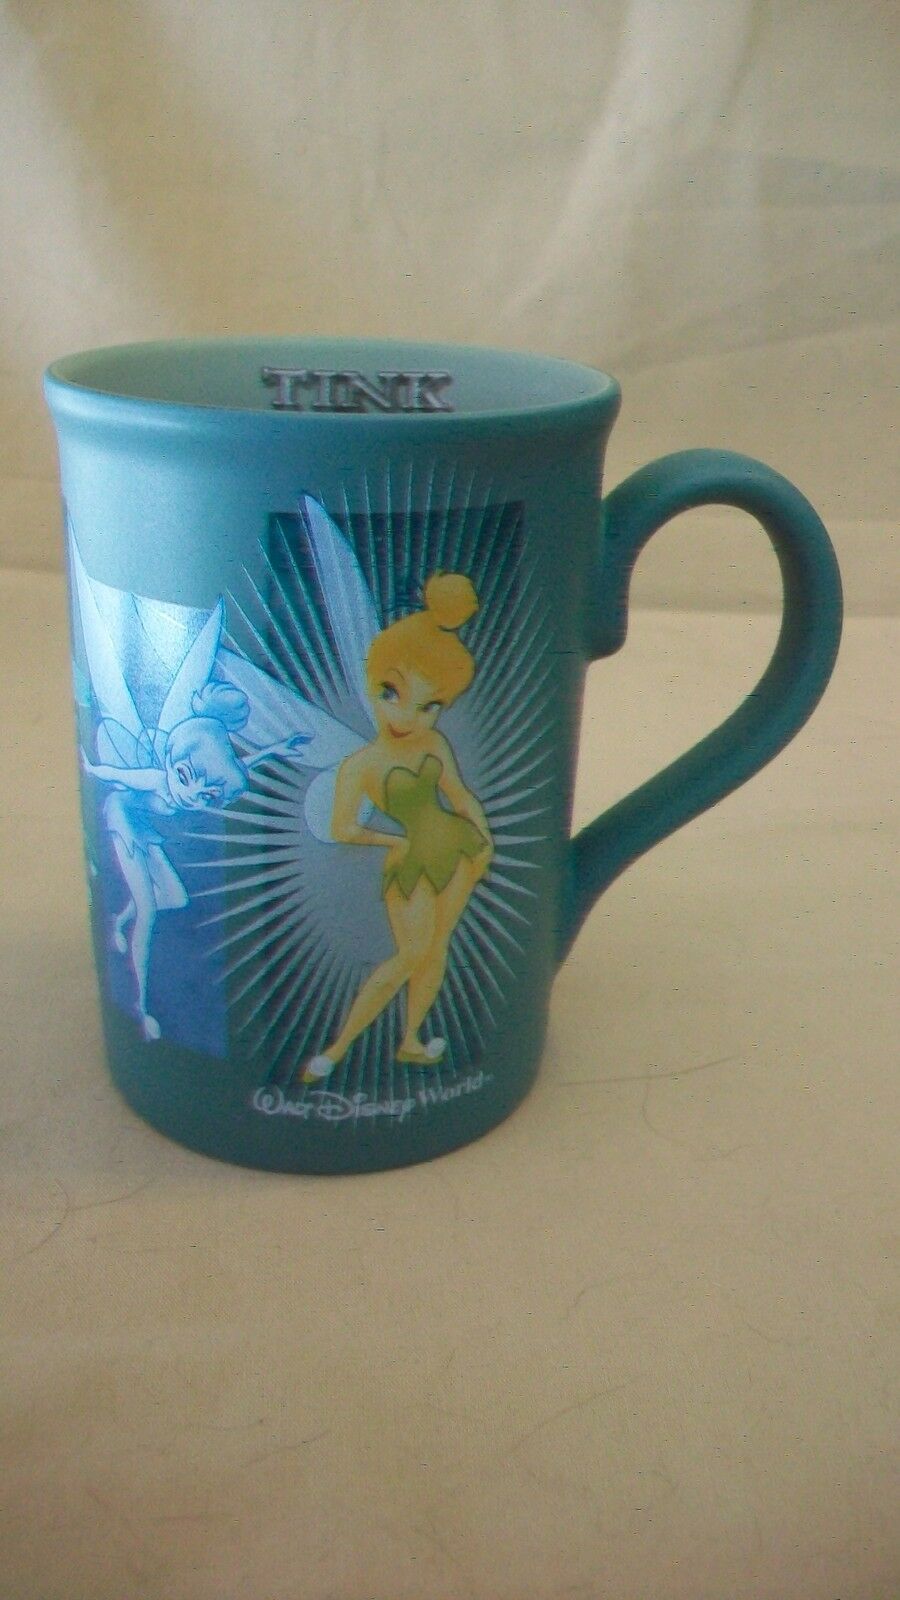 Primary image for TINKER BELLE LIGHT BLUE COFFEE CUP, MULTI POSES FROM WALT DISNEY WORLD